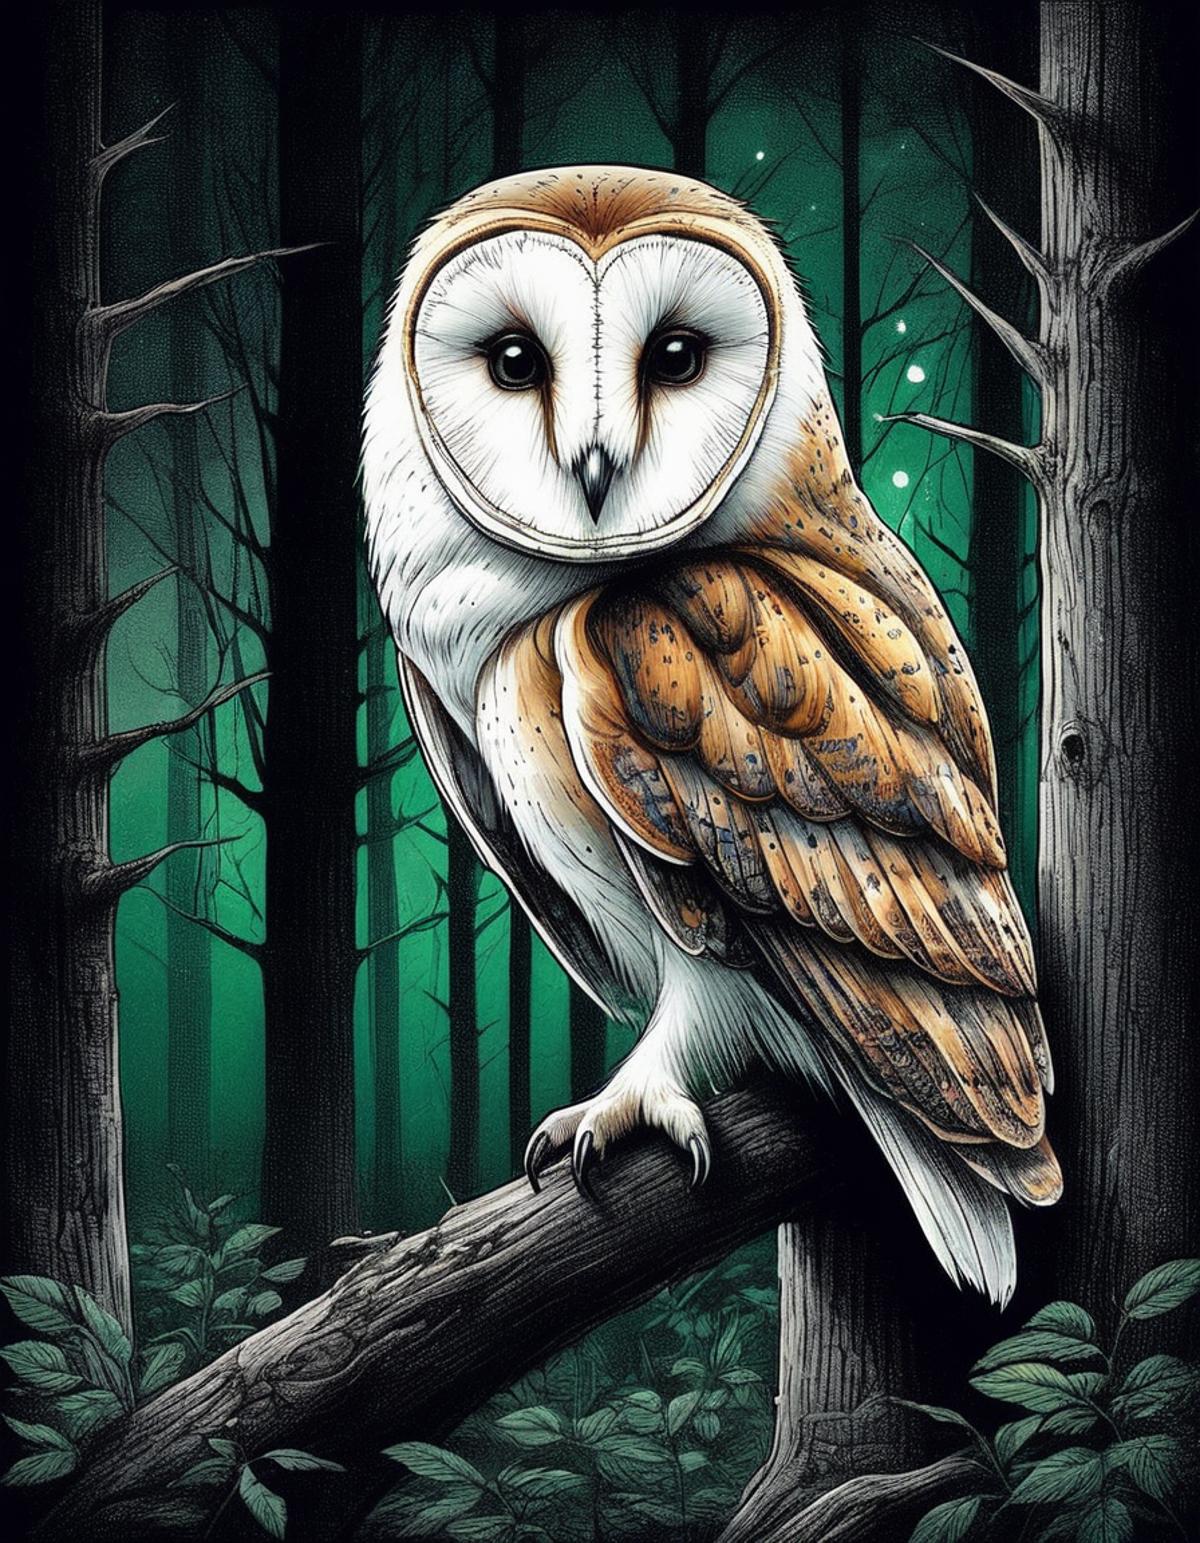 A large owl perched on a tree branch in a forest at night.